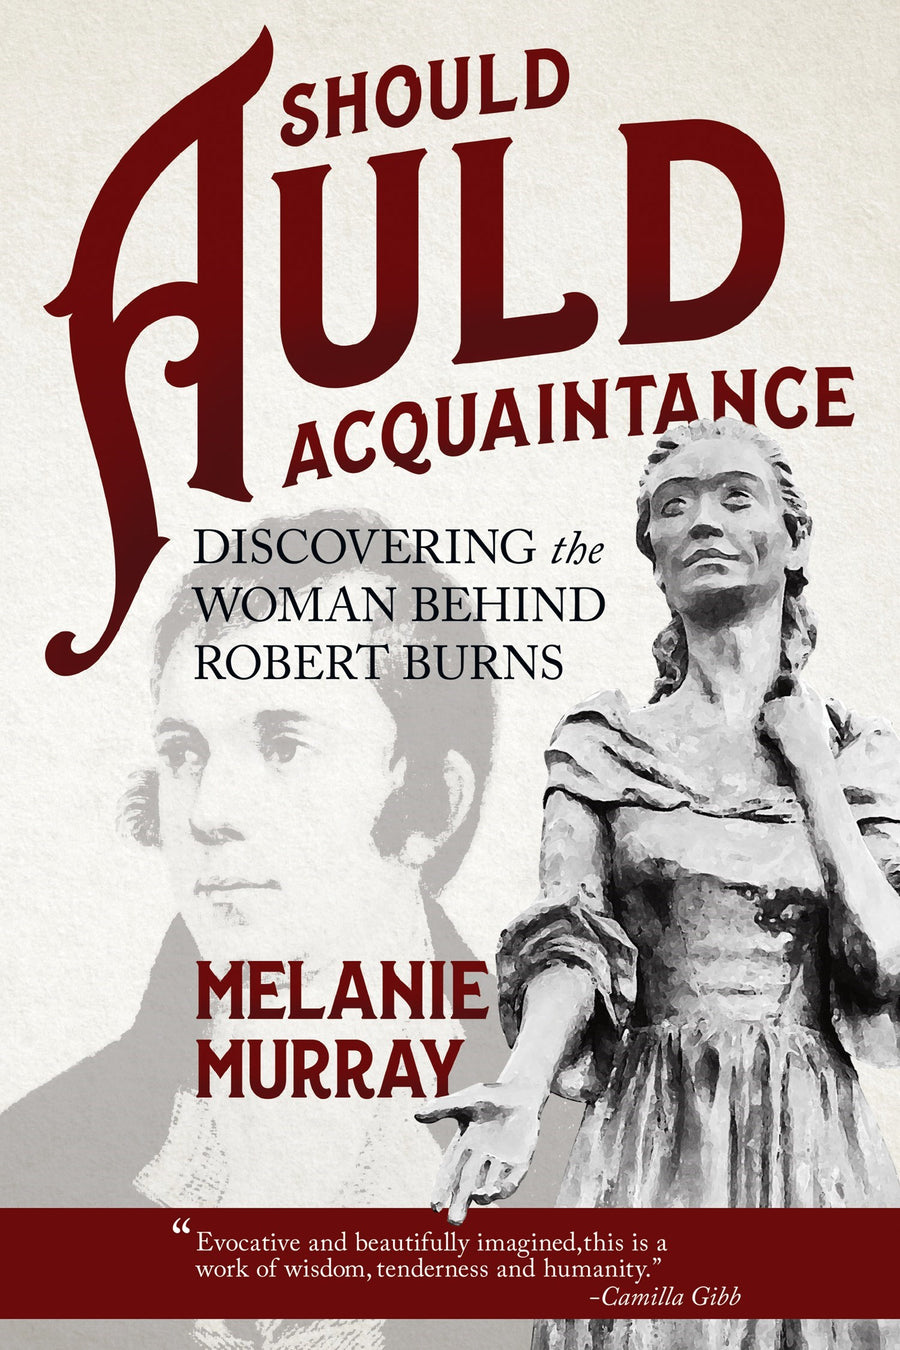 Should Auld Acquaintance: Discovering the Woman Behind Robert Burns